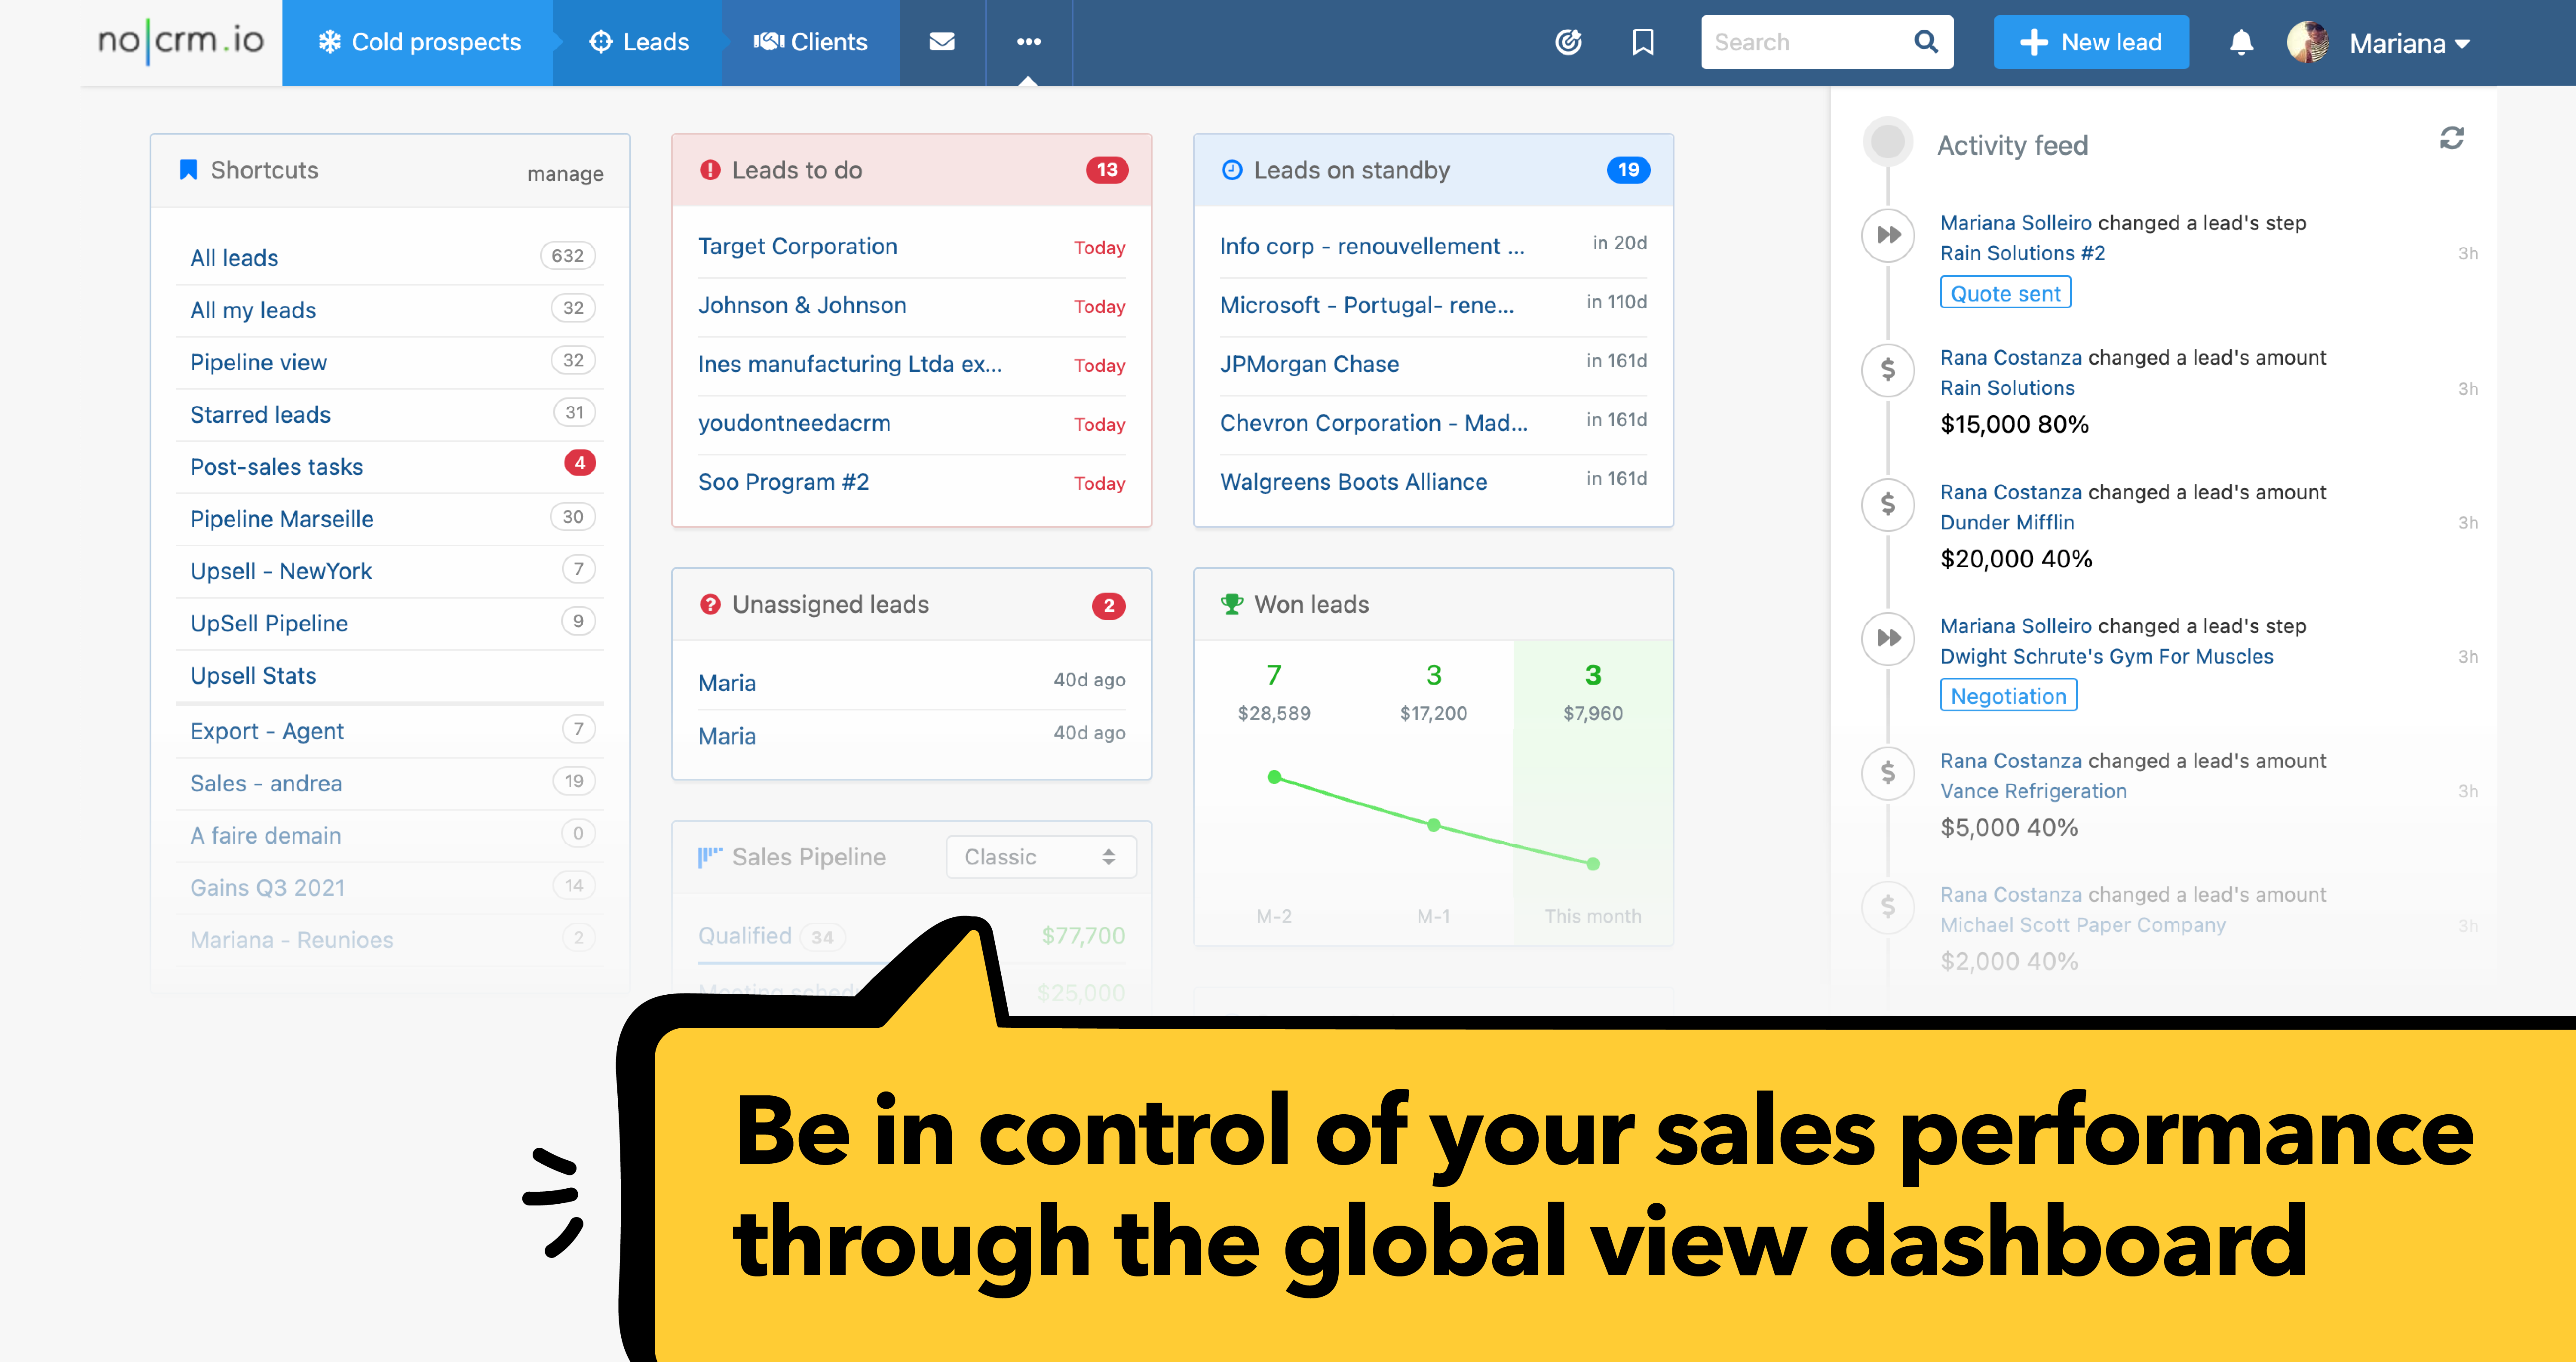 noCRM.io Software - Stay in control of your sales performance